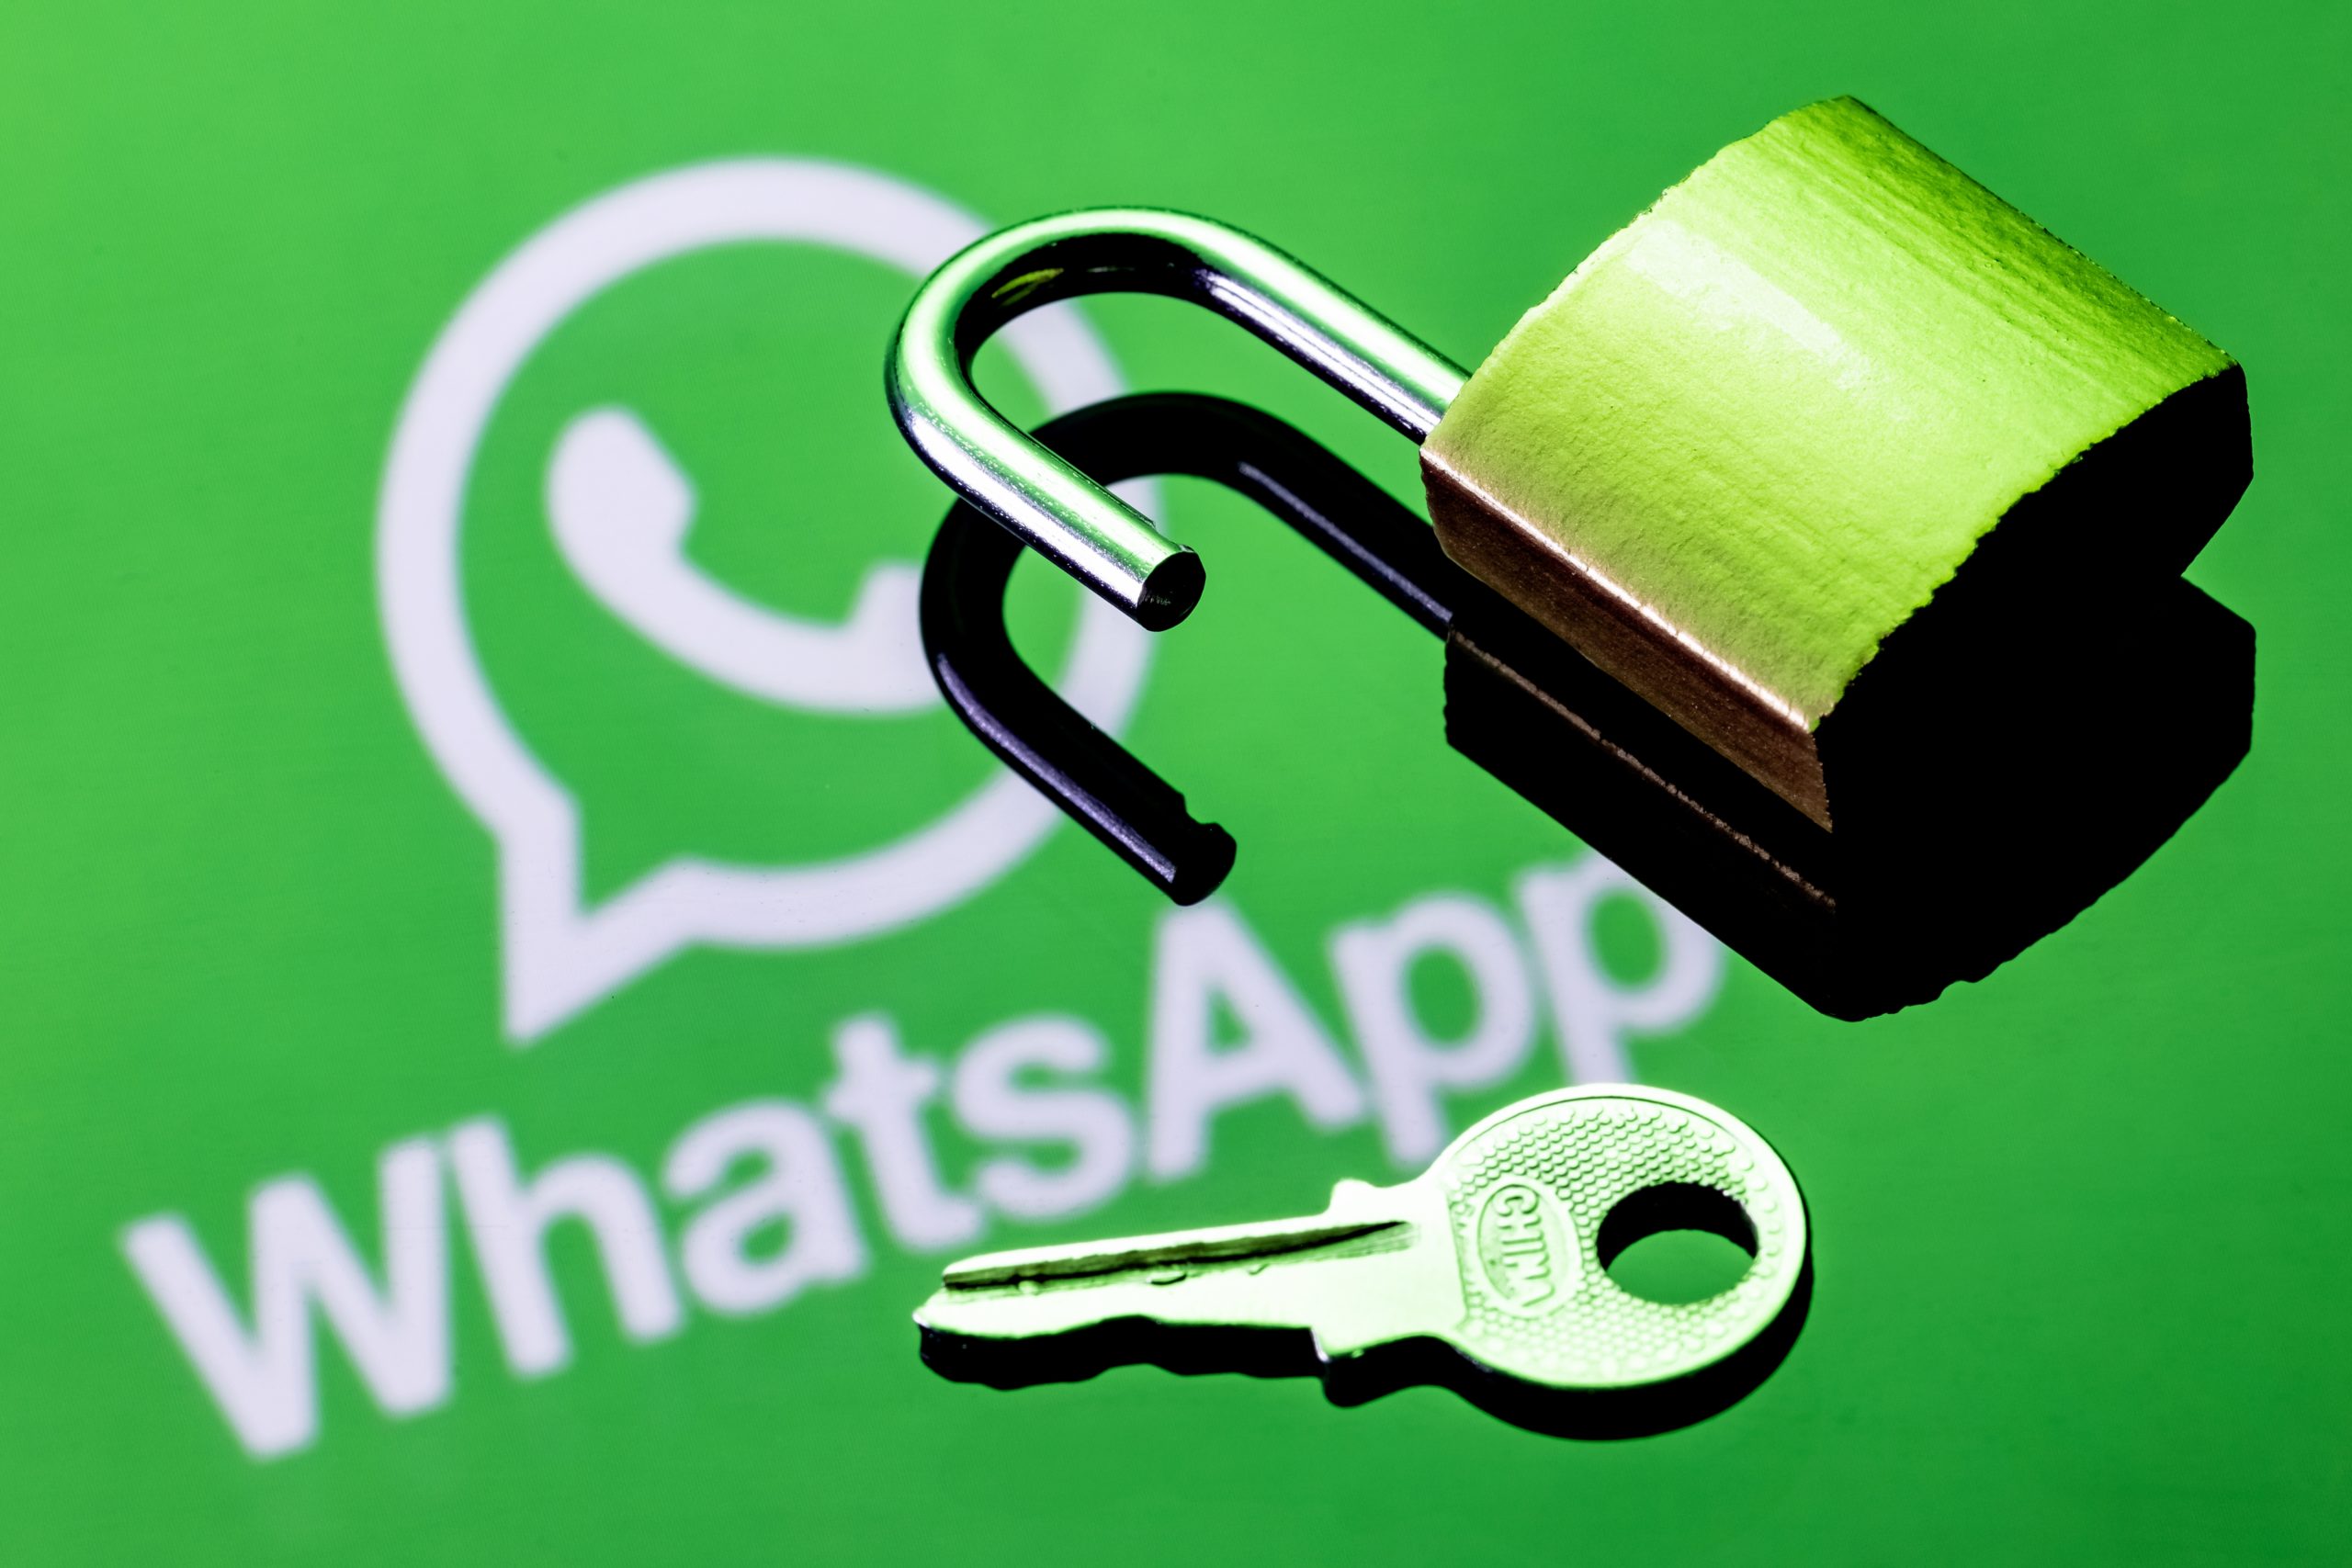 WhatsApp is preparing two new functions that are super waiting for you